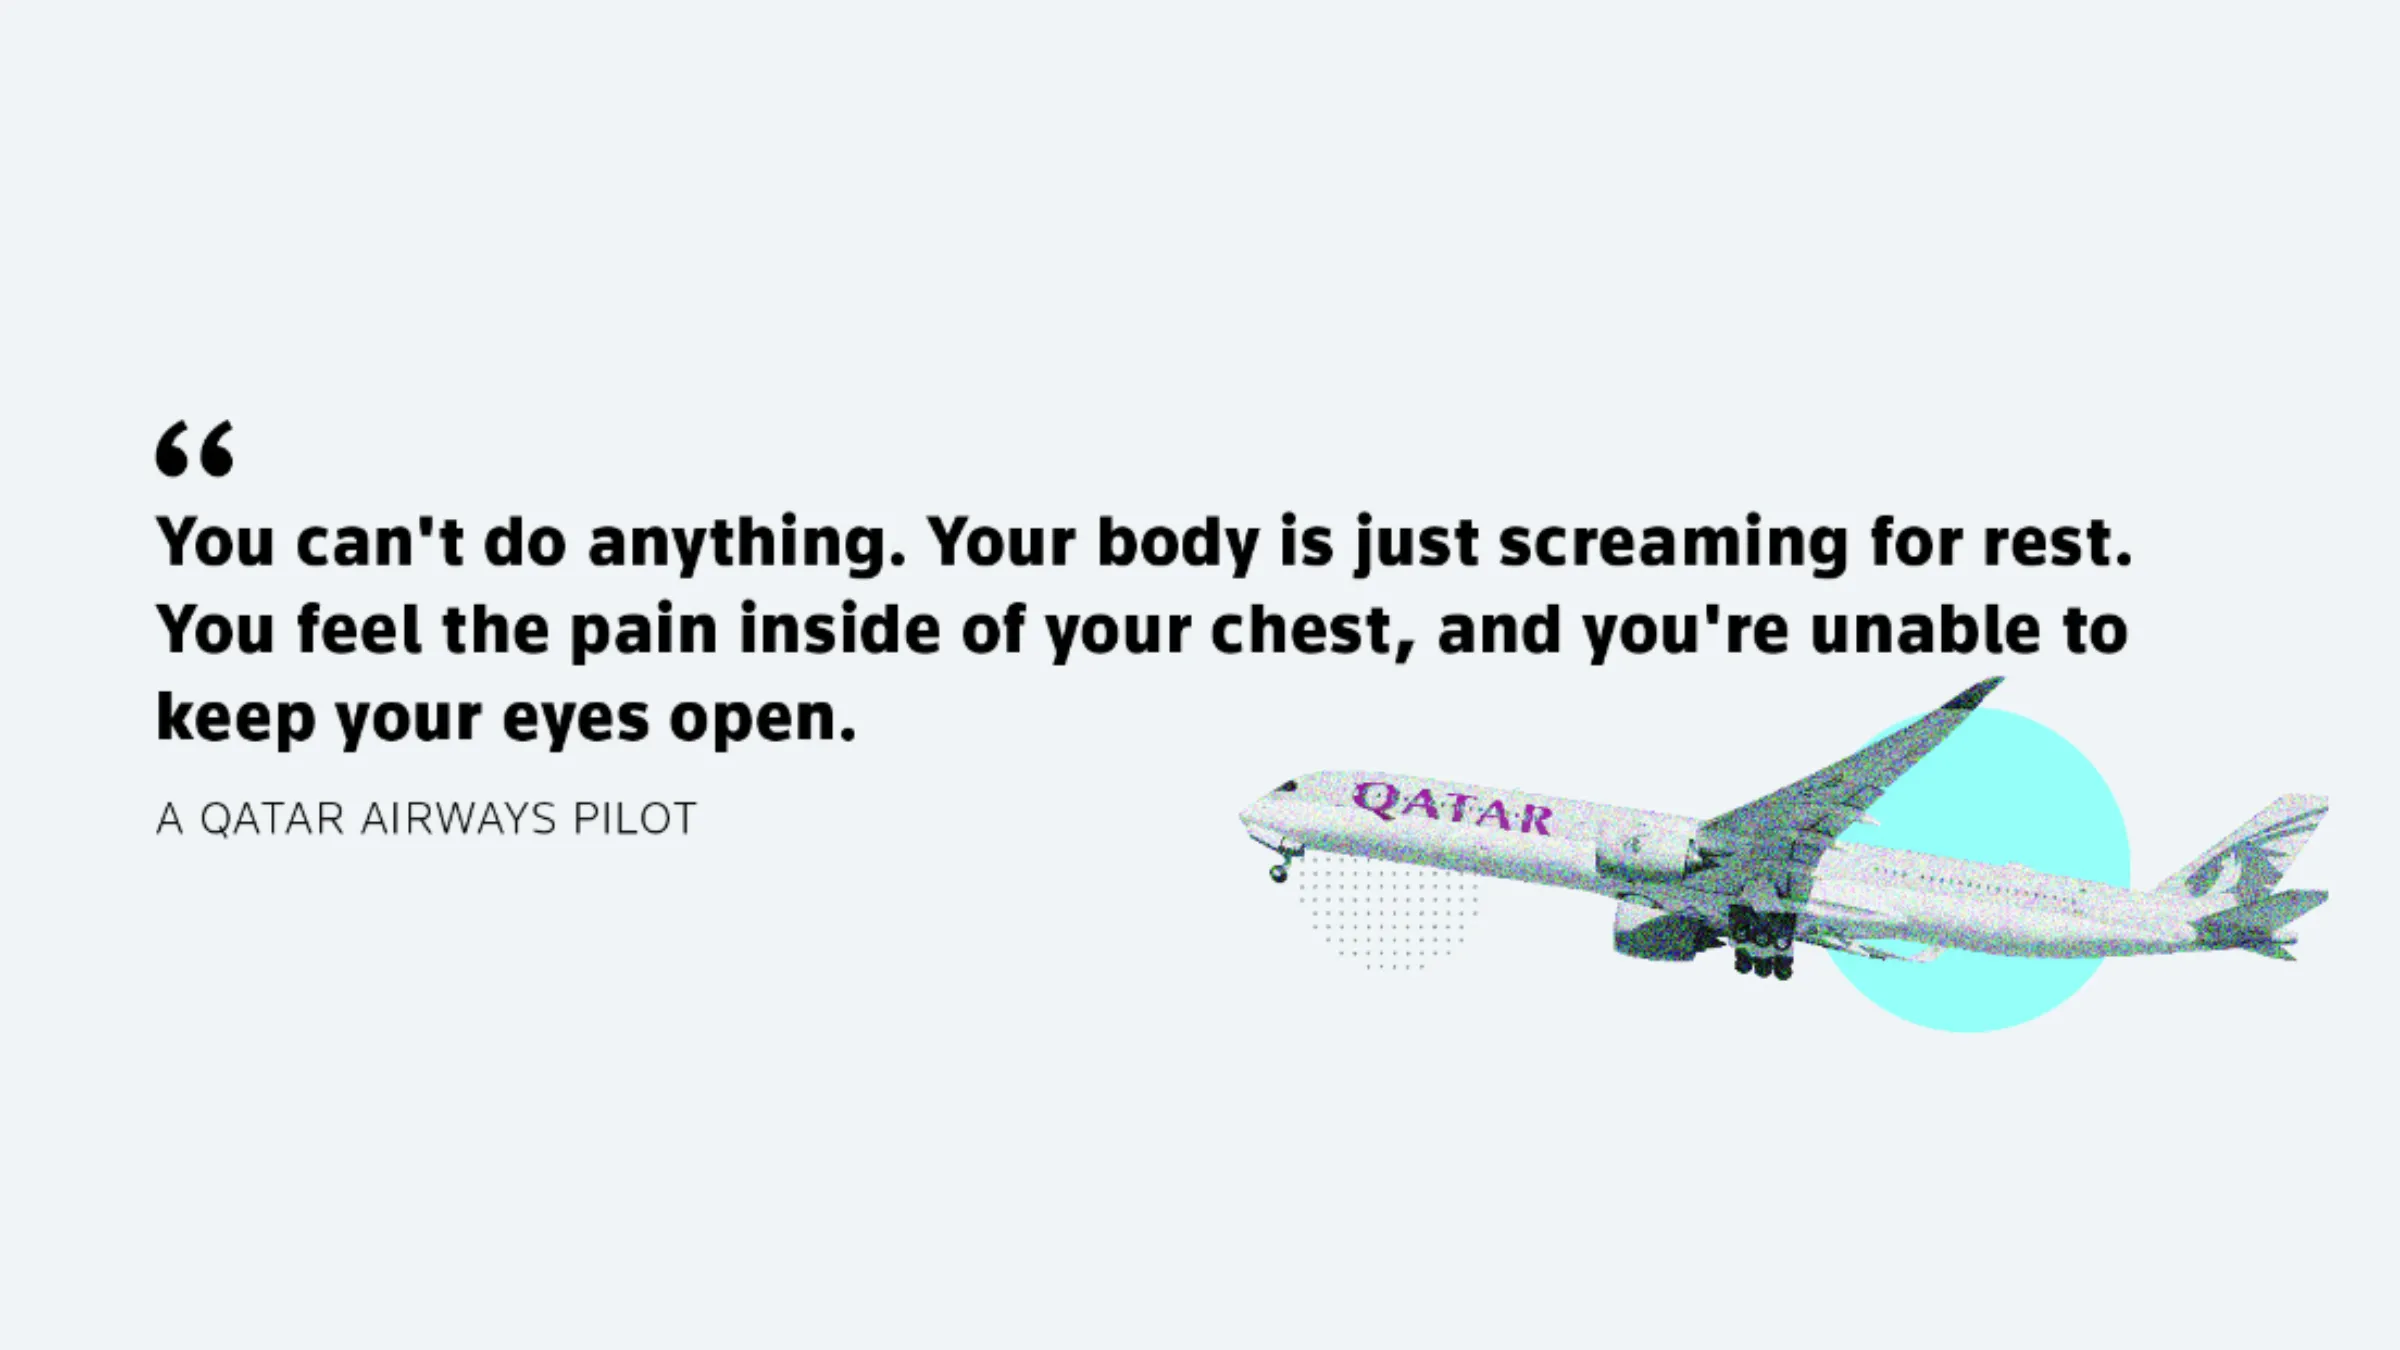 An illustration displaying a Qatar airways plane and a quote from an anonymous Qatar Airways pilot. The text reads: "You can't do anything. Your body is just screaming for rest. You feel the pain inside of your chest, and you're unable to keep your eyes open." - A Qatar Airways pilot